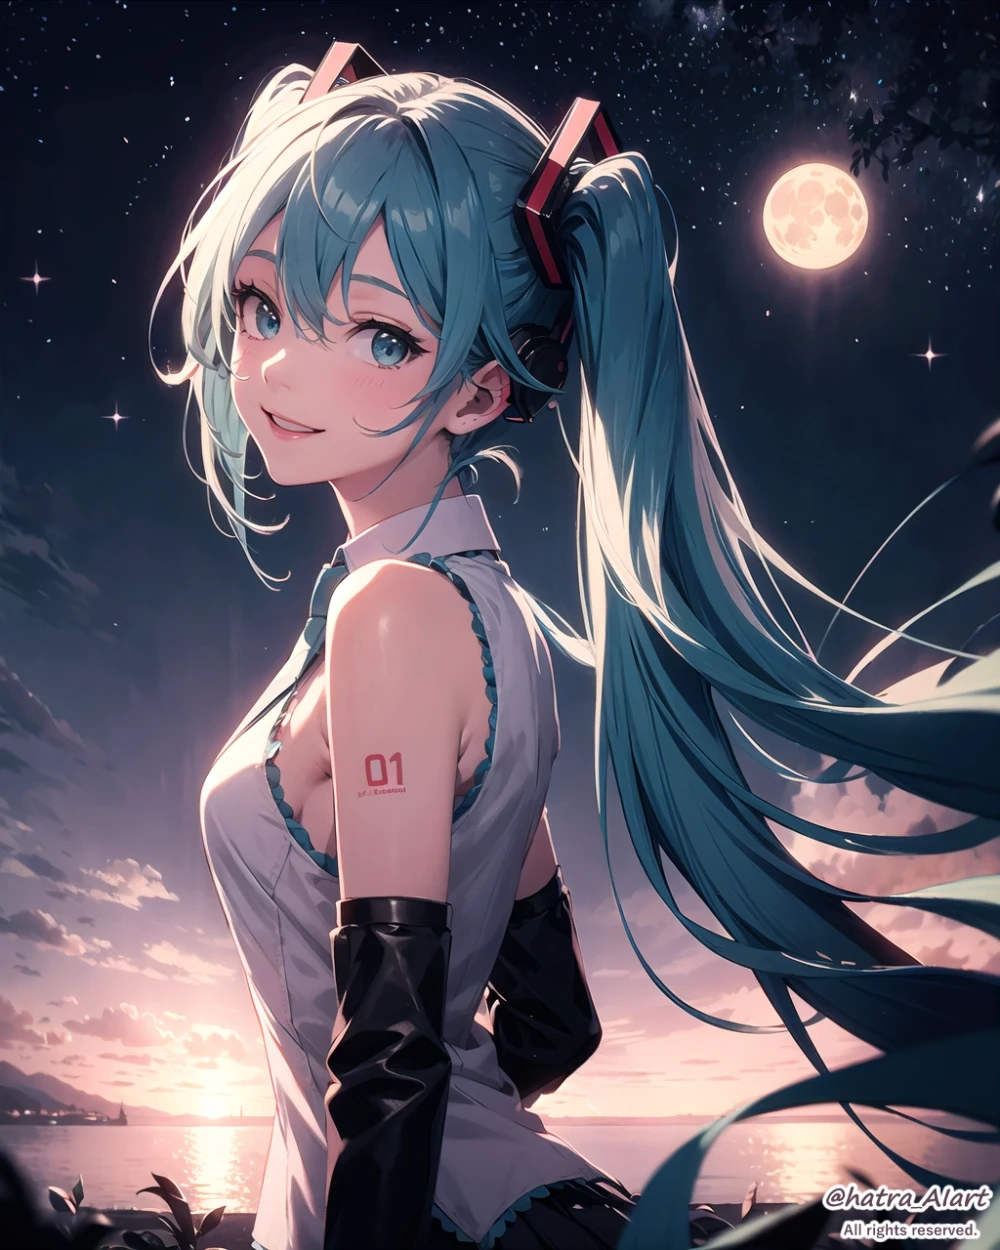 hatsune-miku-anime-style-all-ages-2-14